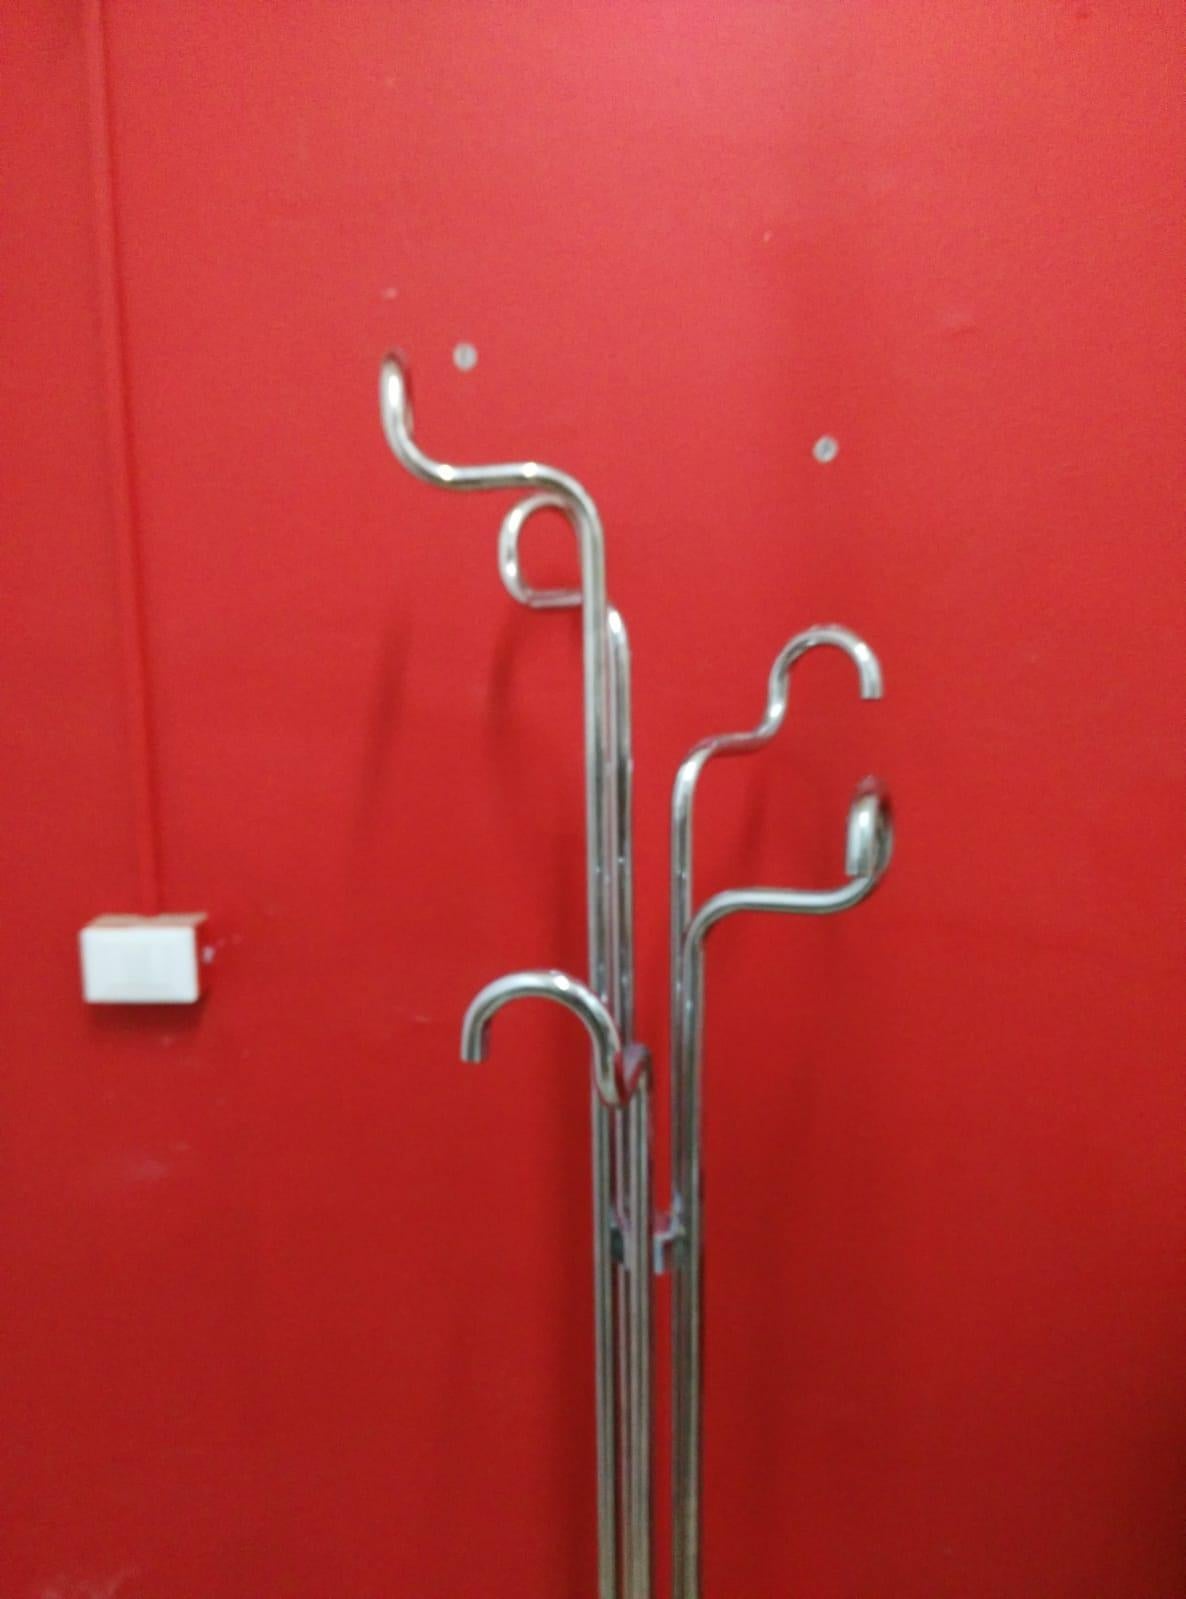 Coat Hanger Made of Steel and Marble Base, Italian Style, 1960s For Sale 1